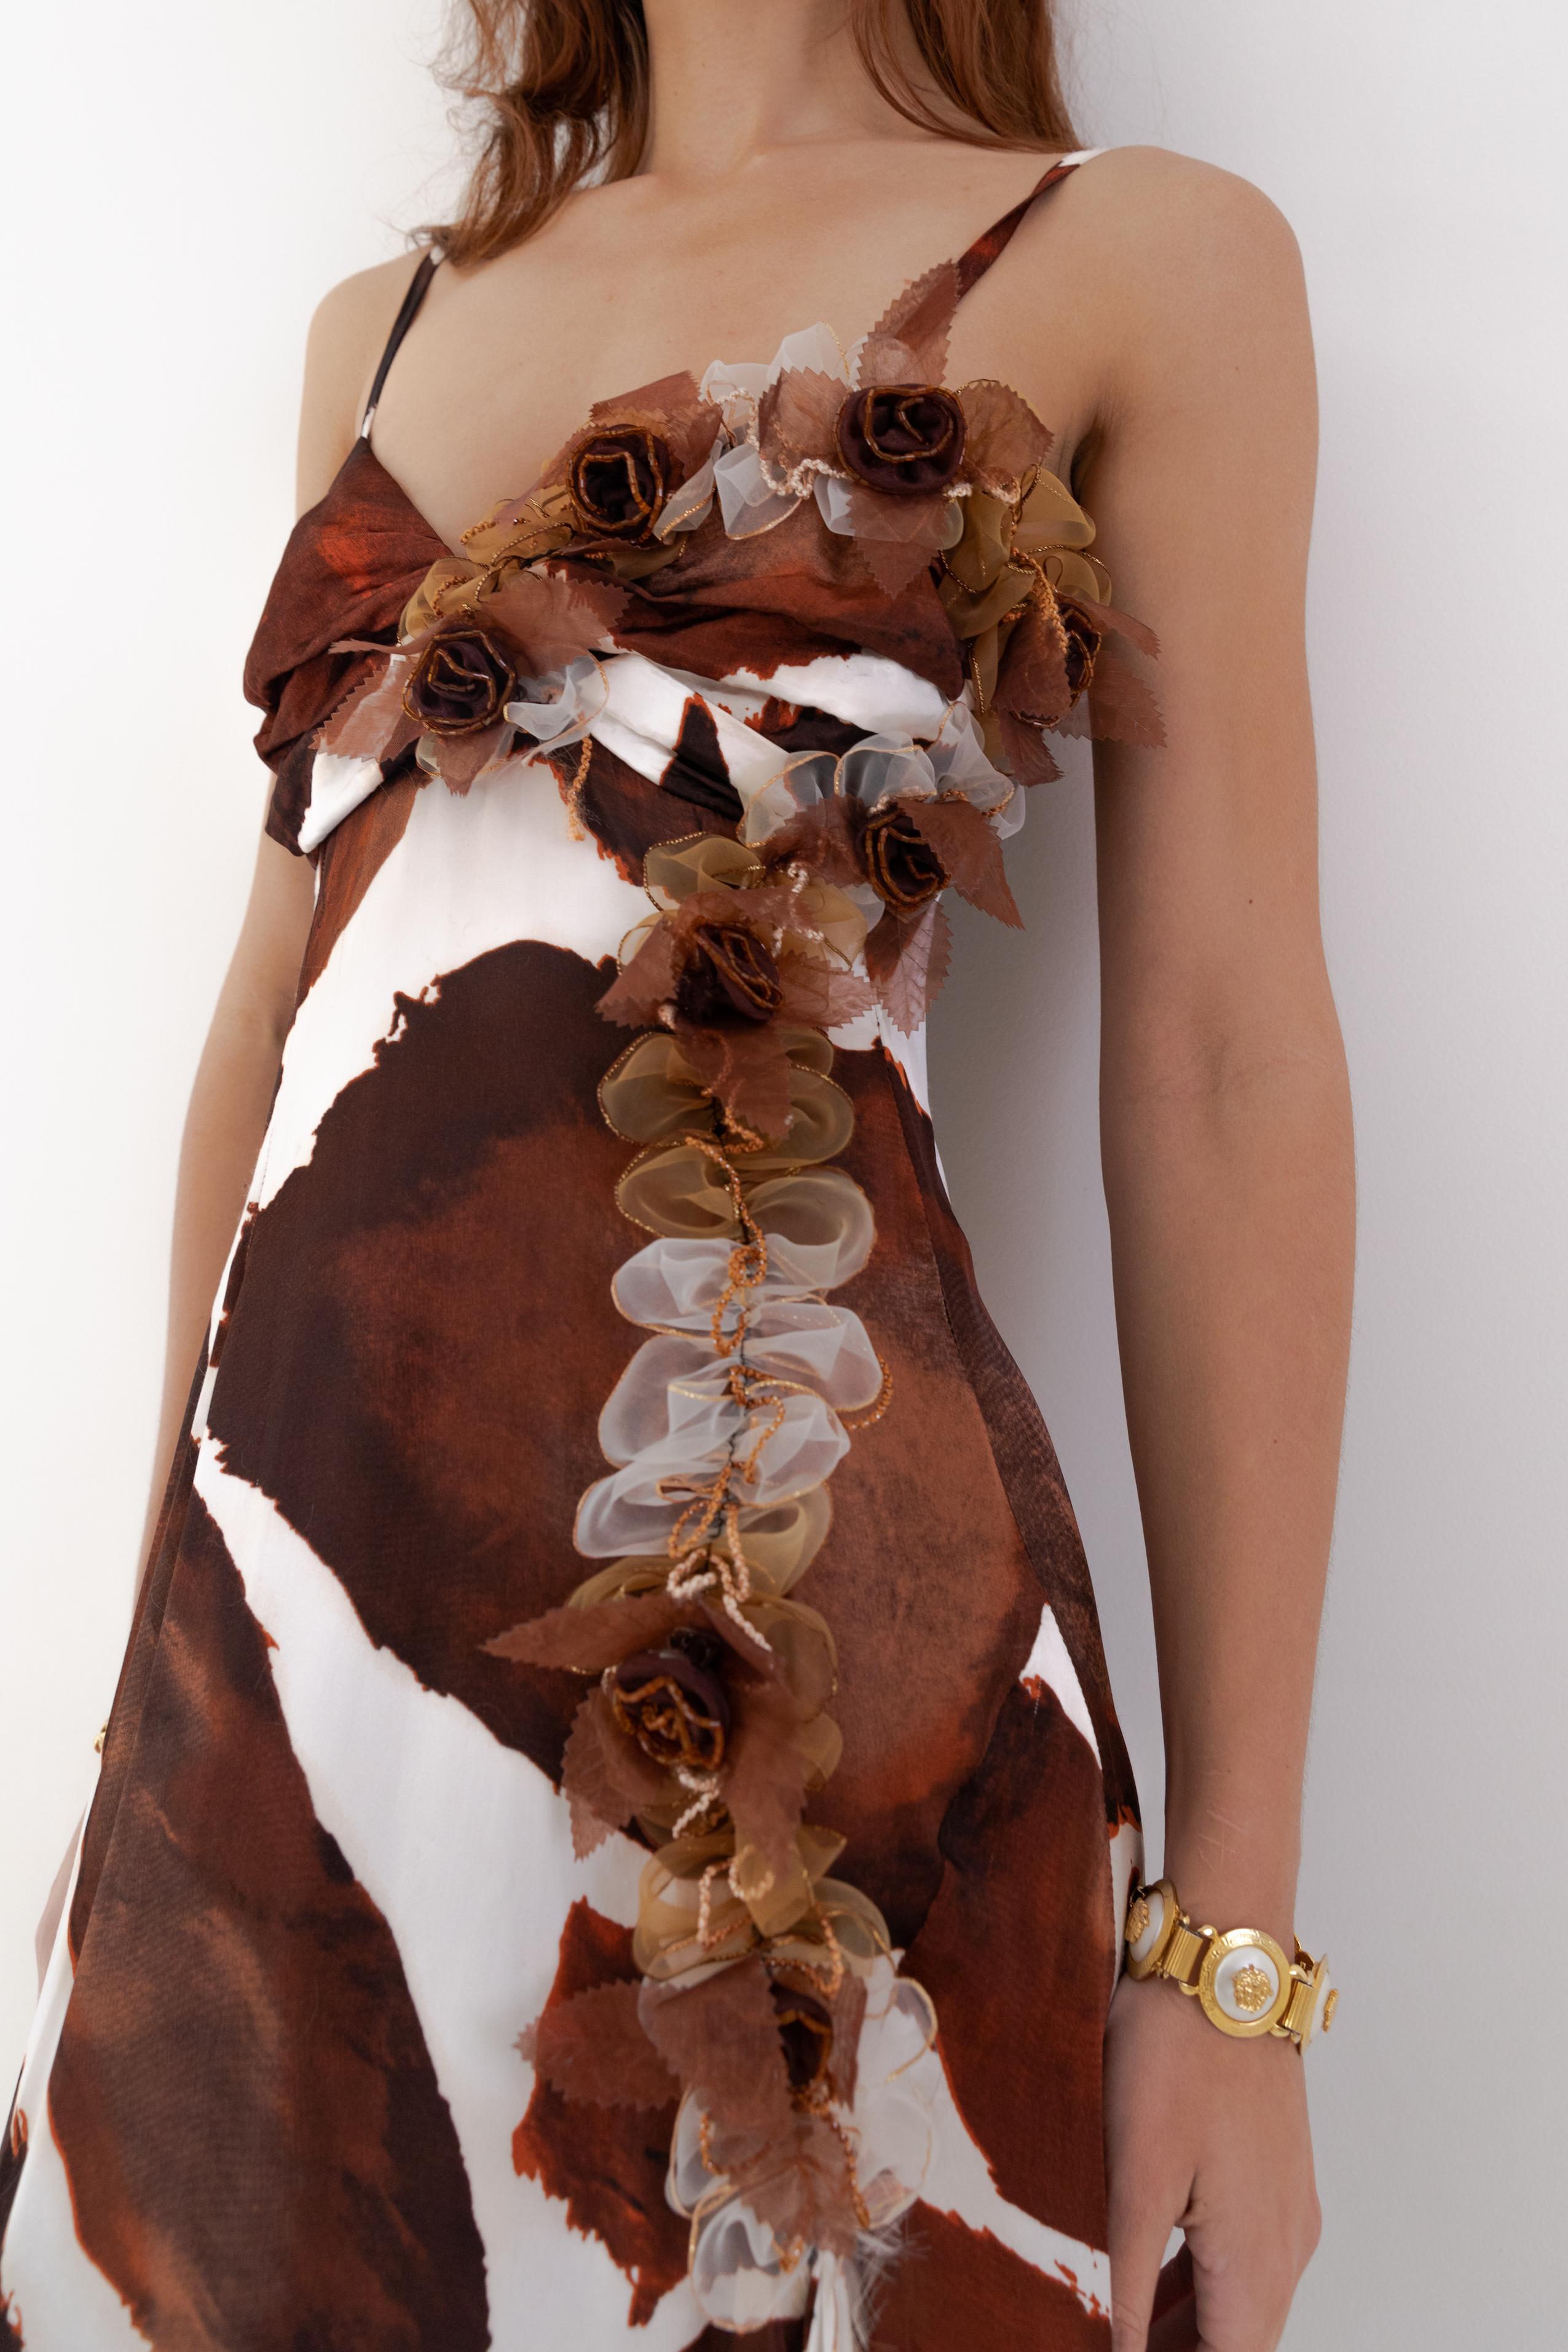 Roberto Cavalli S/S 2006 Giraffe Print Silk Gown with 3D Floral Appliqués For Sale 6